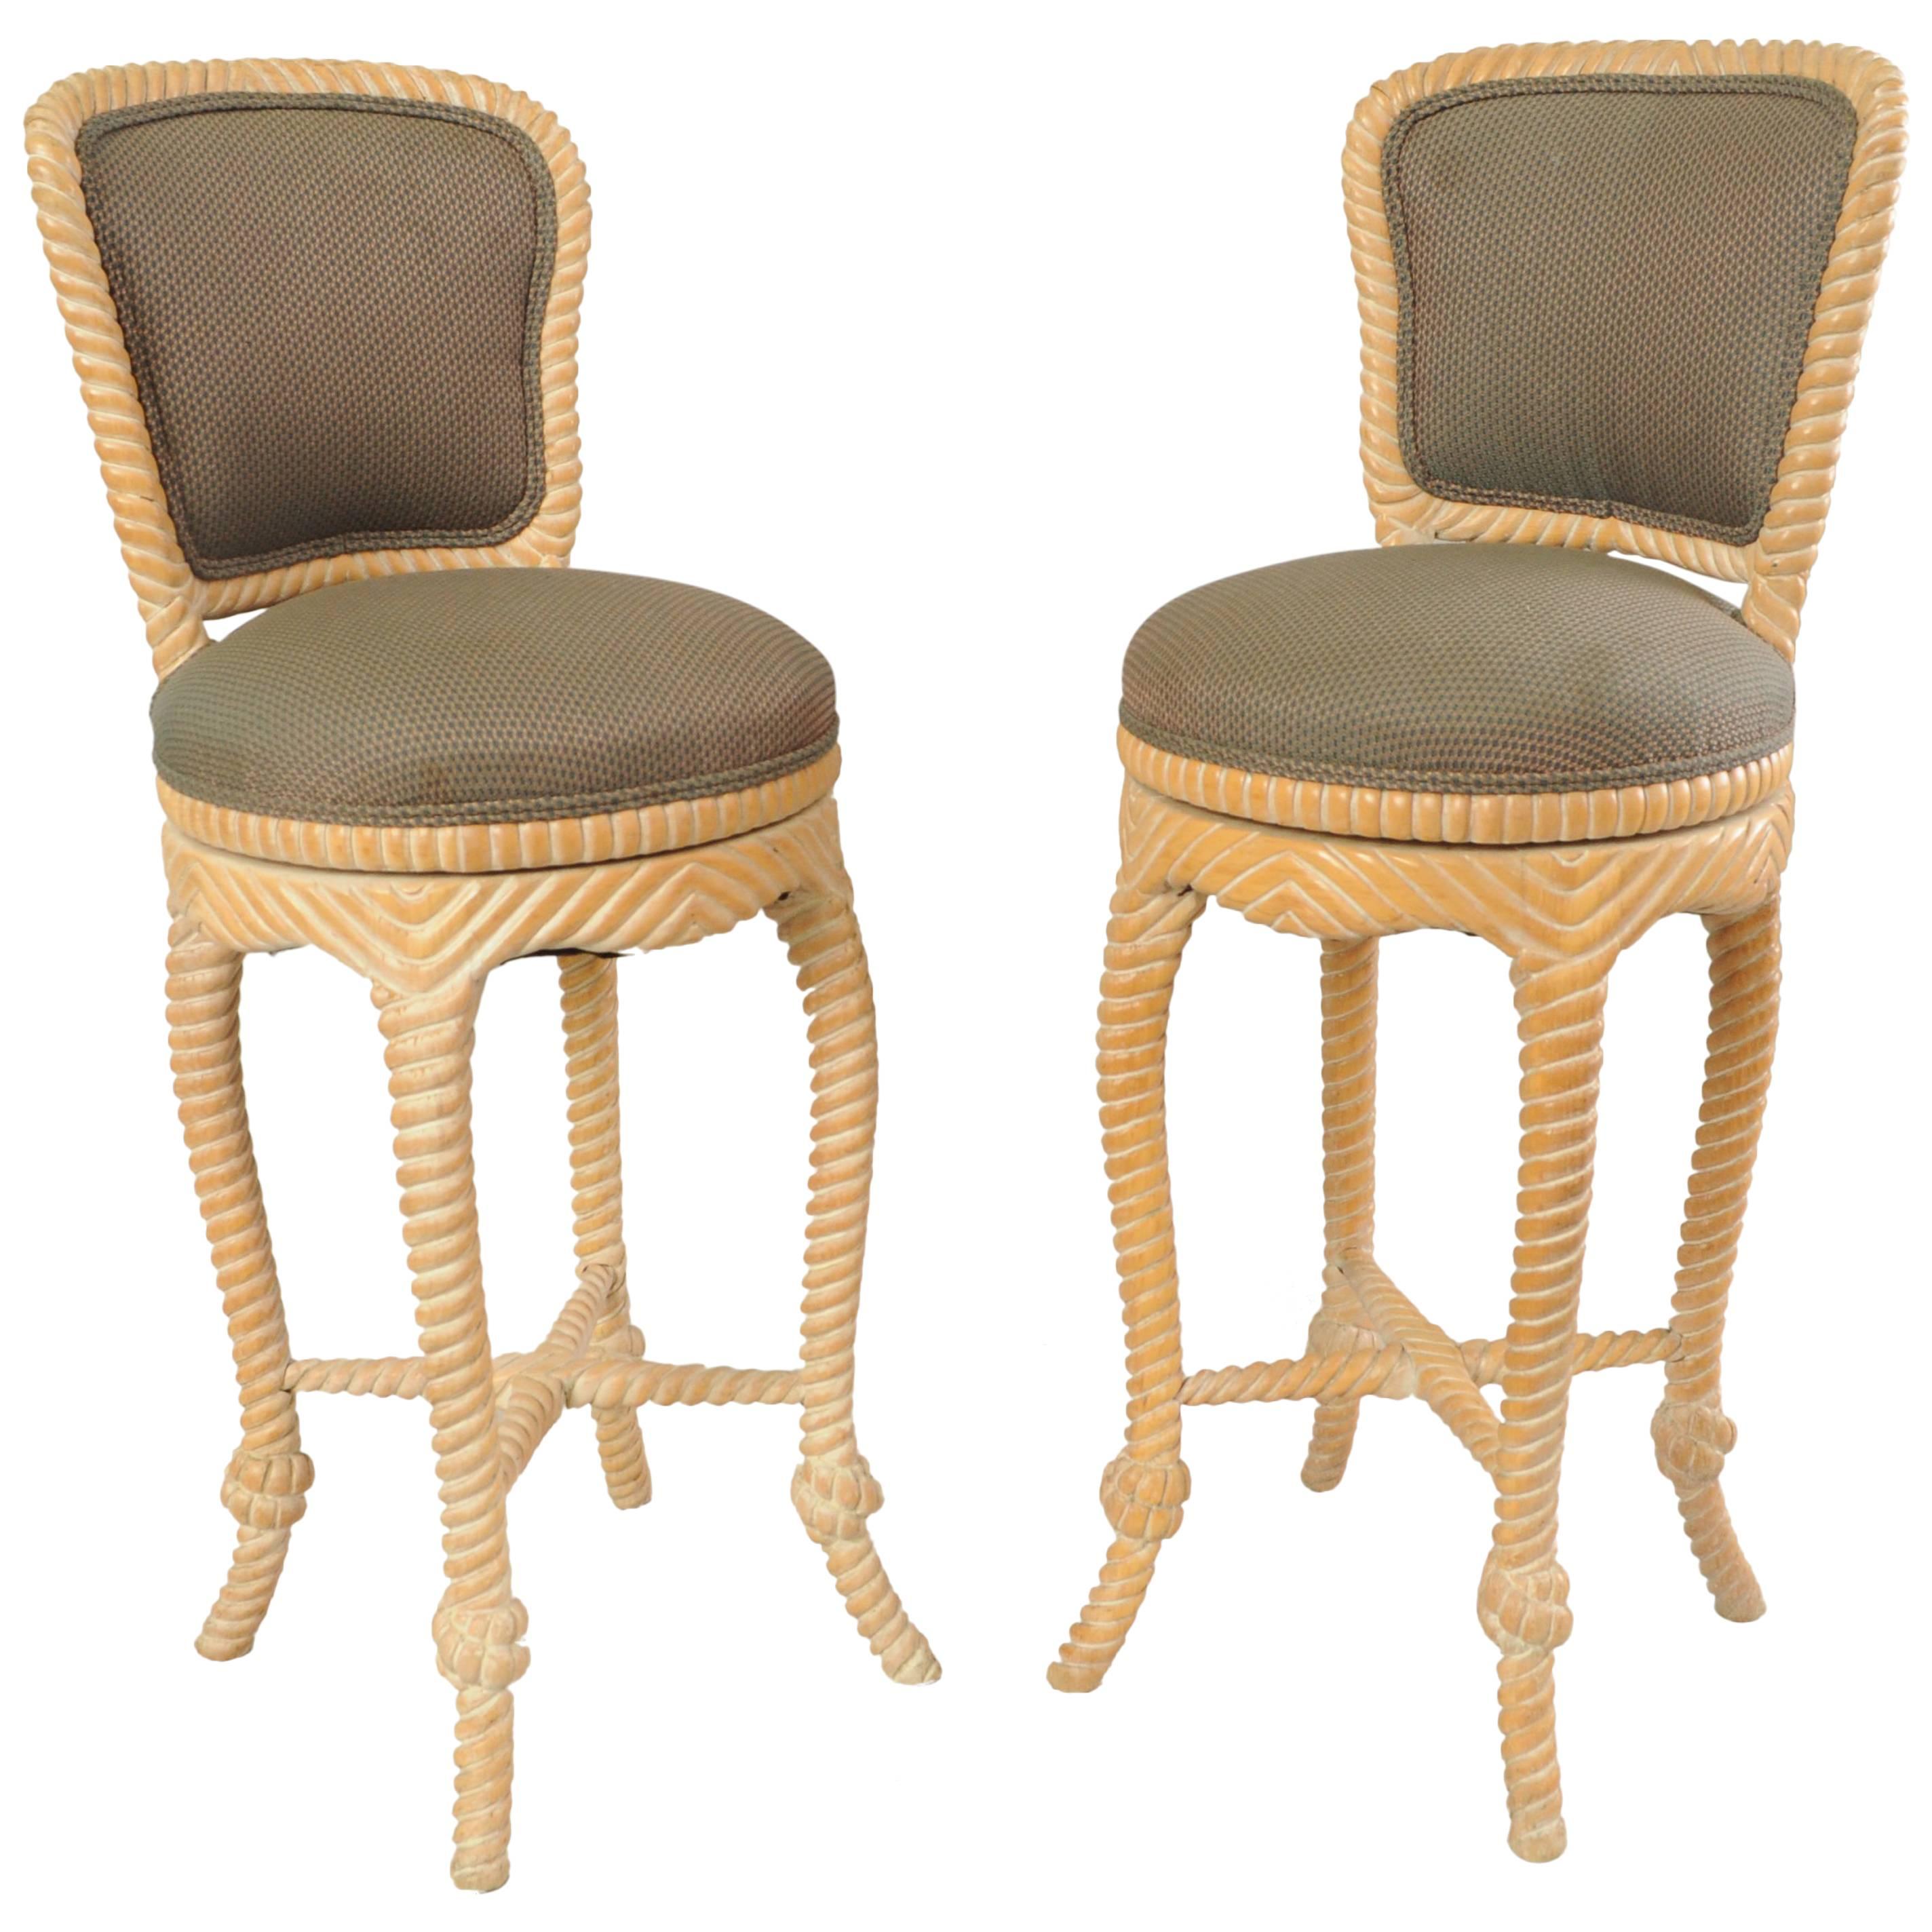 Pair of Vintage Italian Carved Wood Rope and Tassel Swivel Bar Stools Chairs